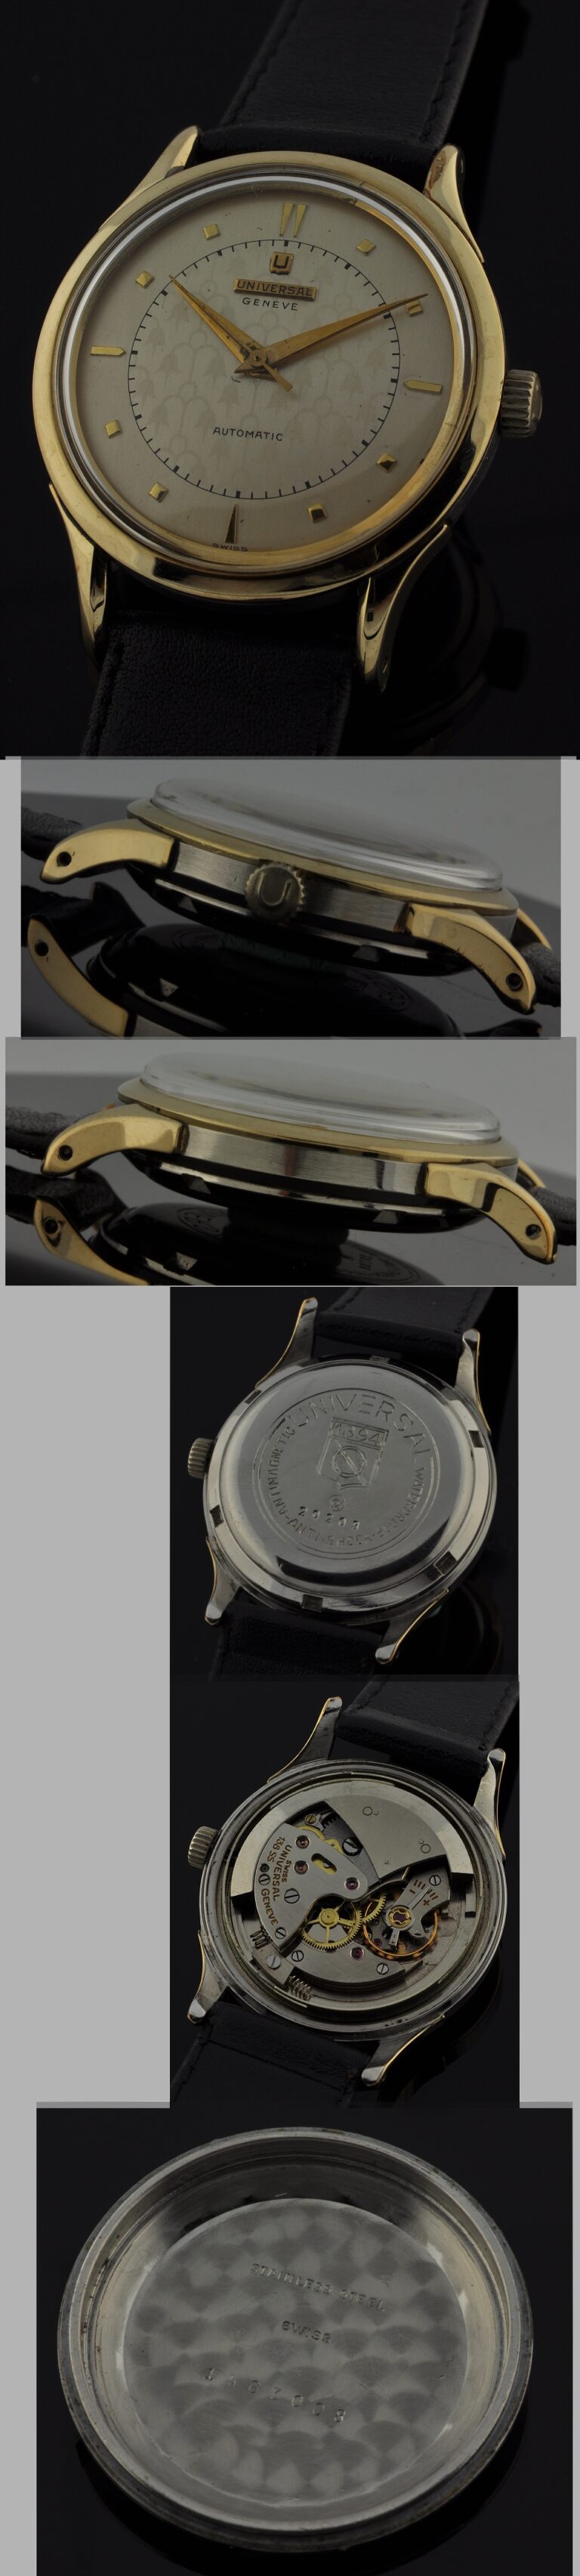 1960s Universal Geneve gold-capped watch with original two-tone case, flared lugs, bellflower-motif dial, winding crown, and name plate.